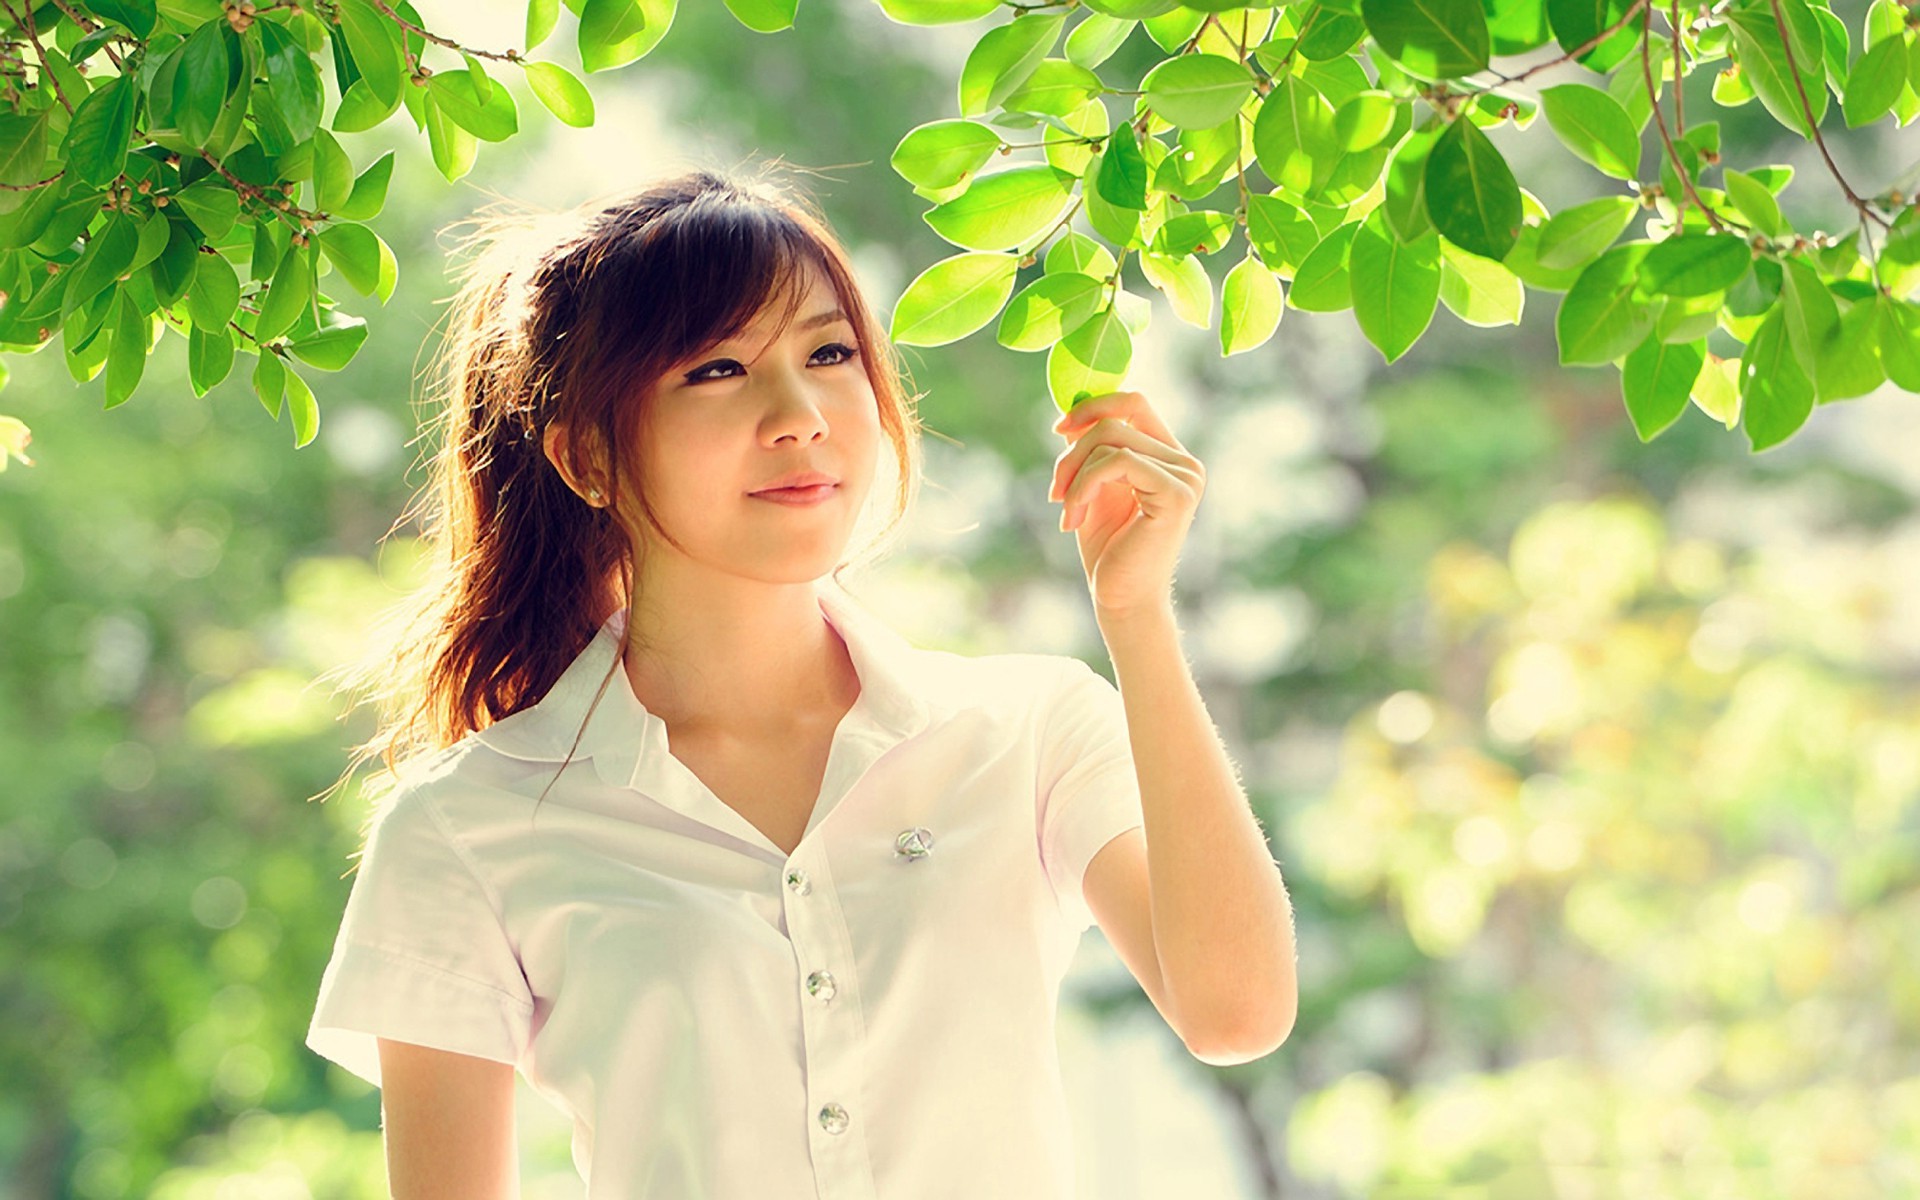 Chinese Girl HD Wallpaper Live Hq Pictures Image